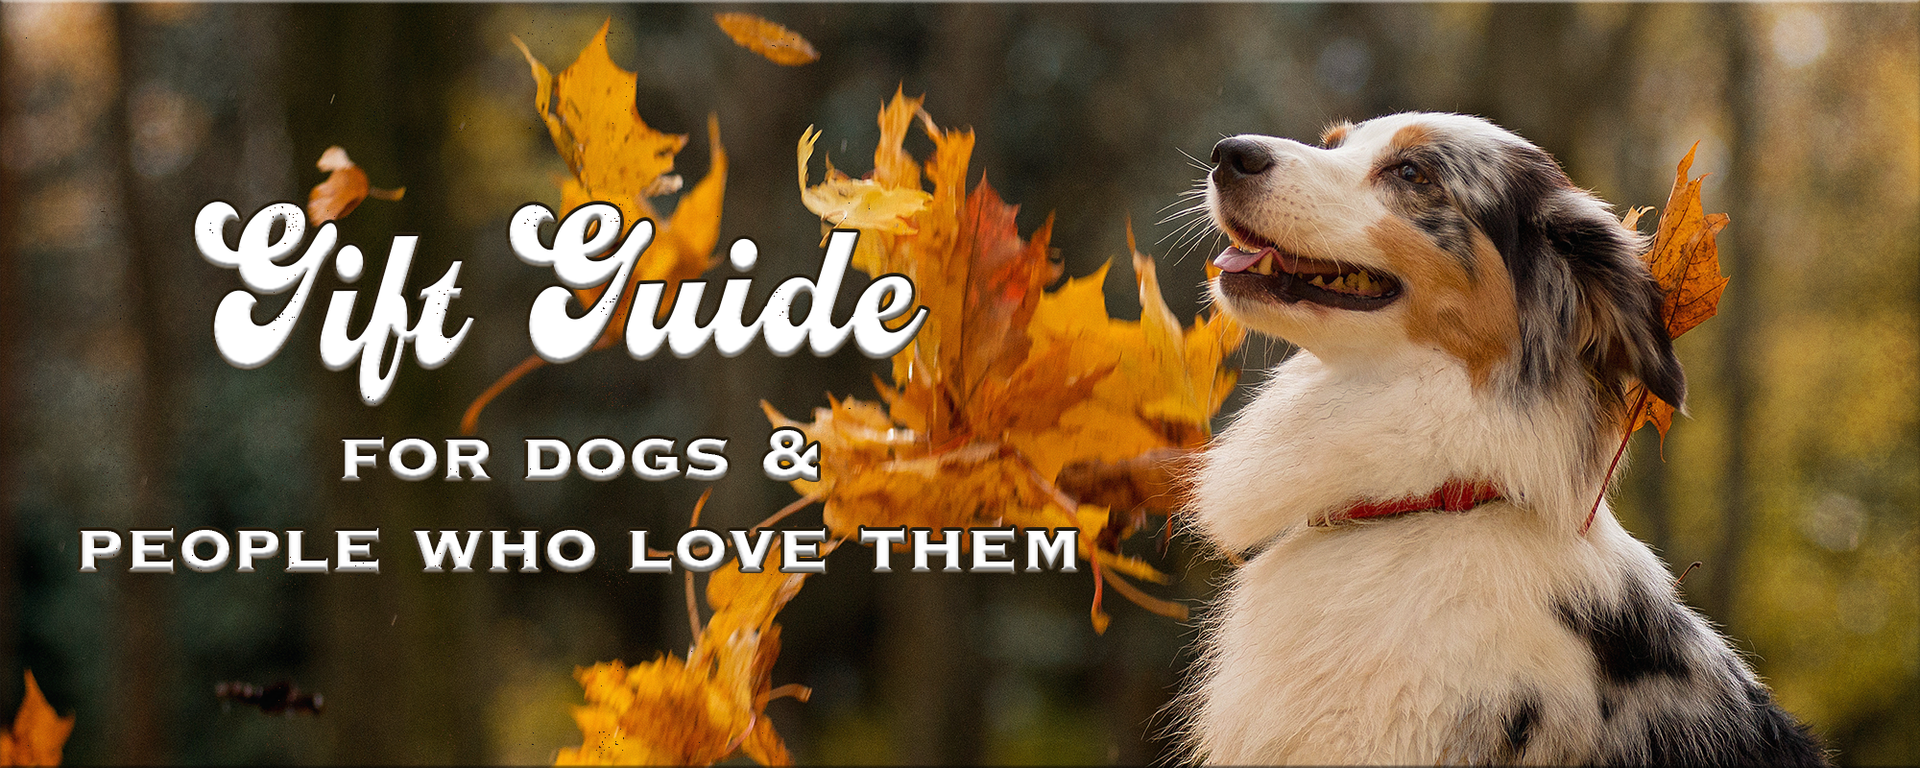 Gift Guide for dog lovers with australian shepherd and autumn maple leaves falling